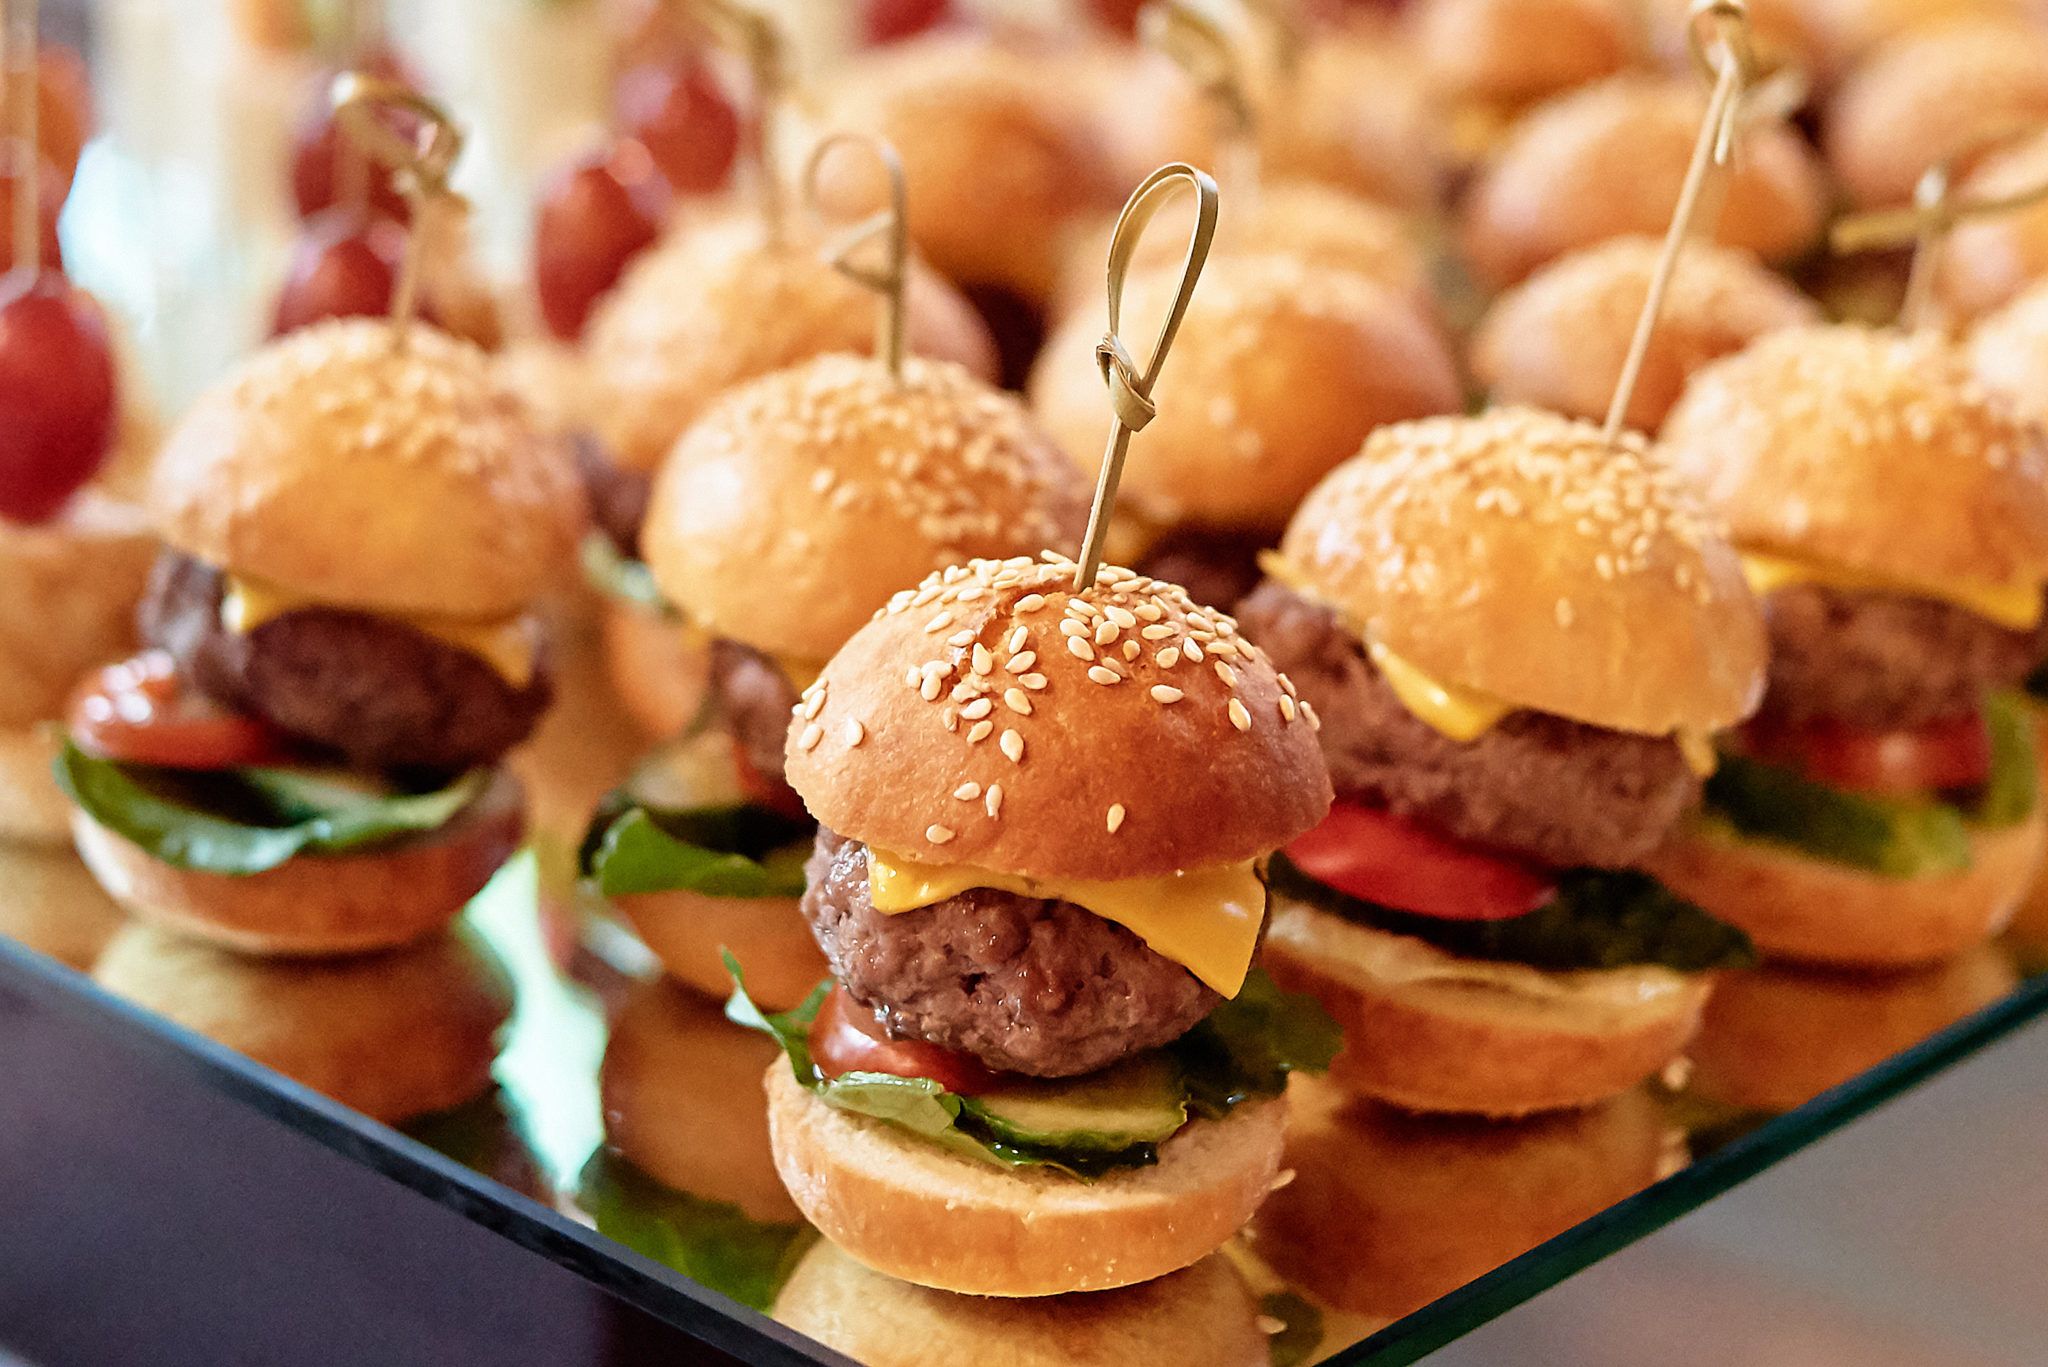 RECIPE: How to make these tasty Mini Cheese Burgers ahead of your next BBQ